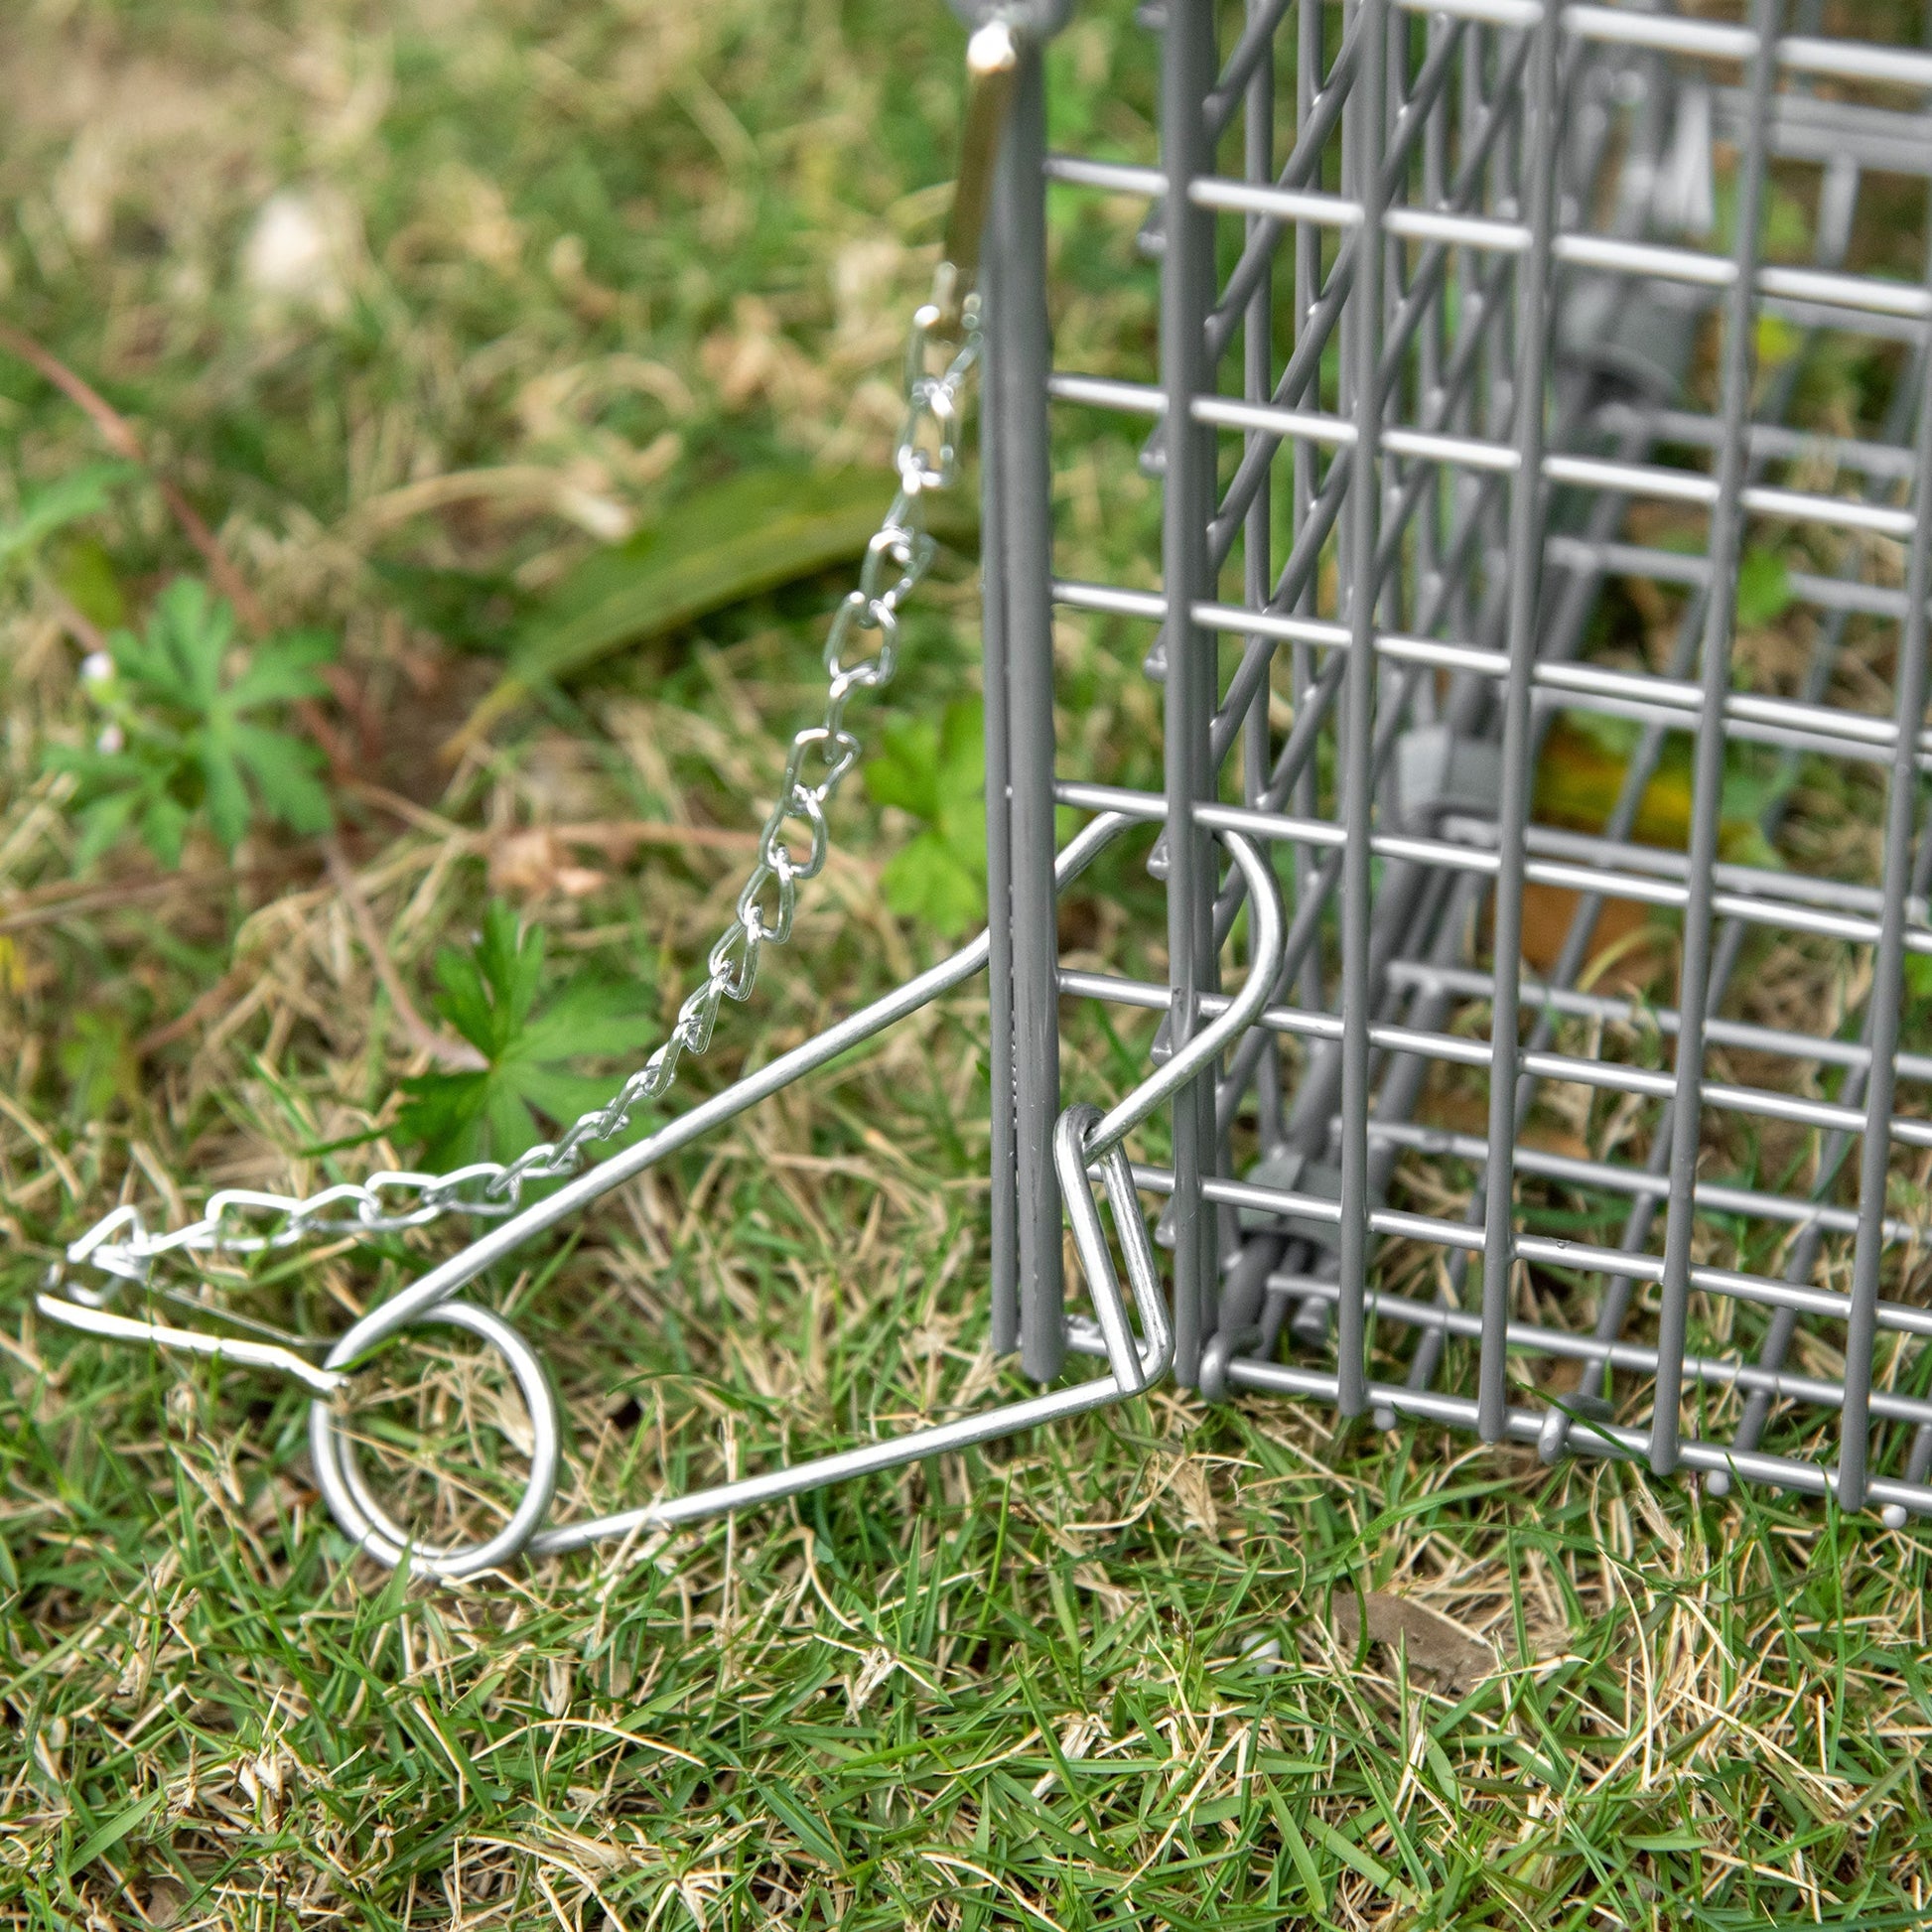 Live Animal Trap, One-Door Raccoon, Animal-Friendly Humane Catch &; Release Steel Cage for Squirrels, Rabbits, Mink, Gopher, Raccoons, Weasels, 36.6" x 12.2" x 13.6" at Gallery Canada